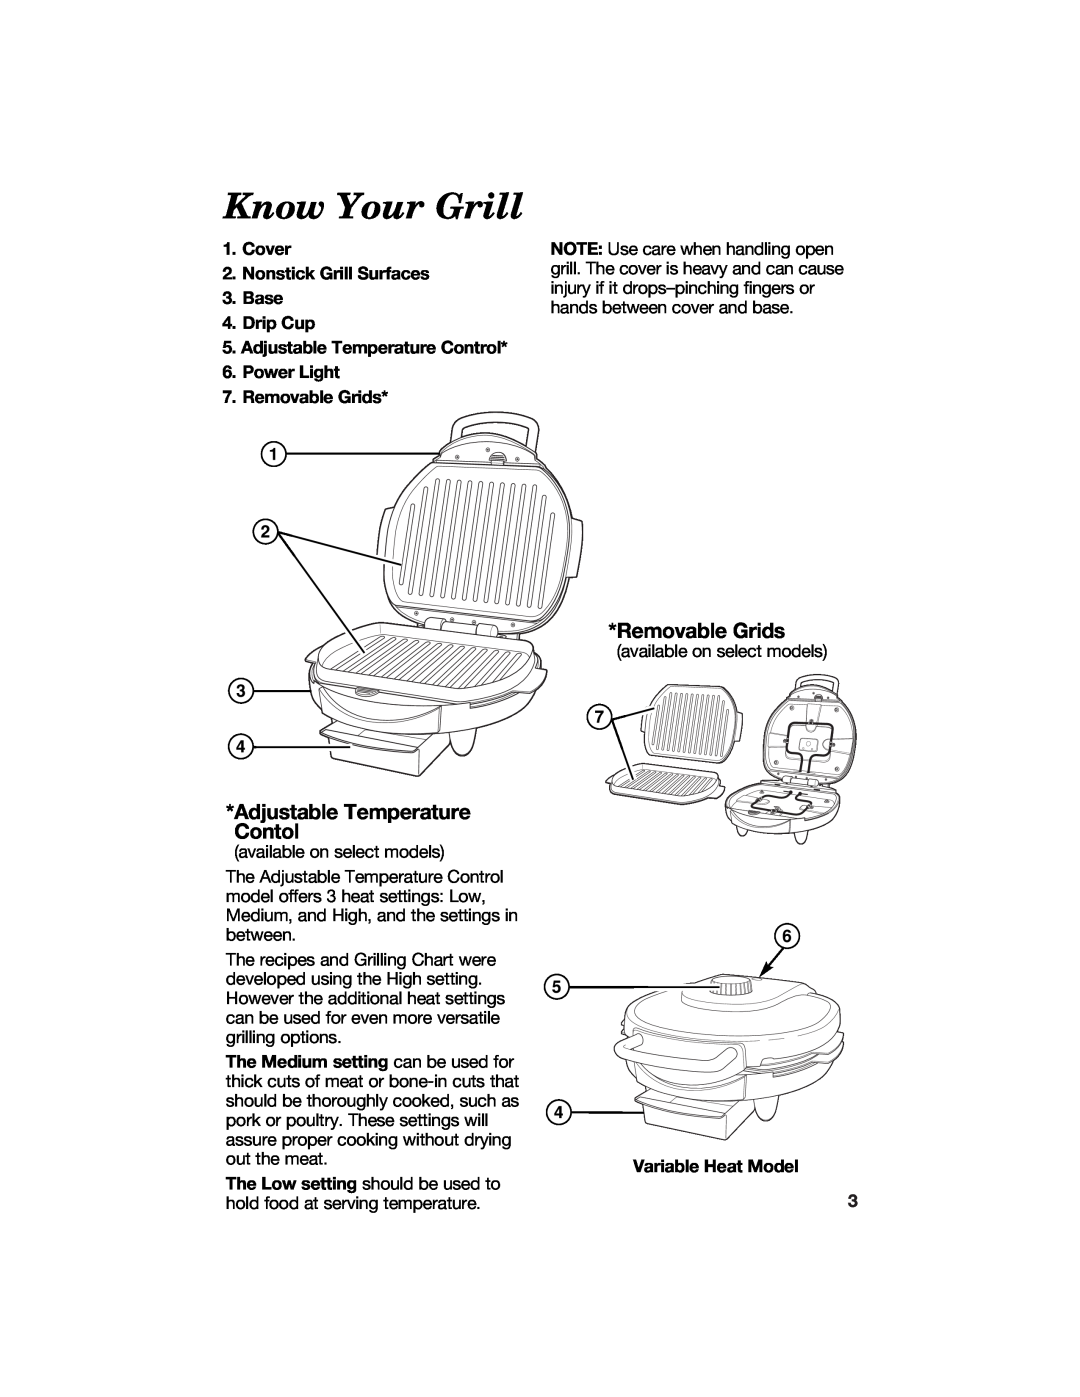 Hamilton Beach Contact Grill manual Know Your Grill, Cover 2.Nonstick Grill Surfaces 3.Base, Power Light 7.Removable Grids 